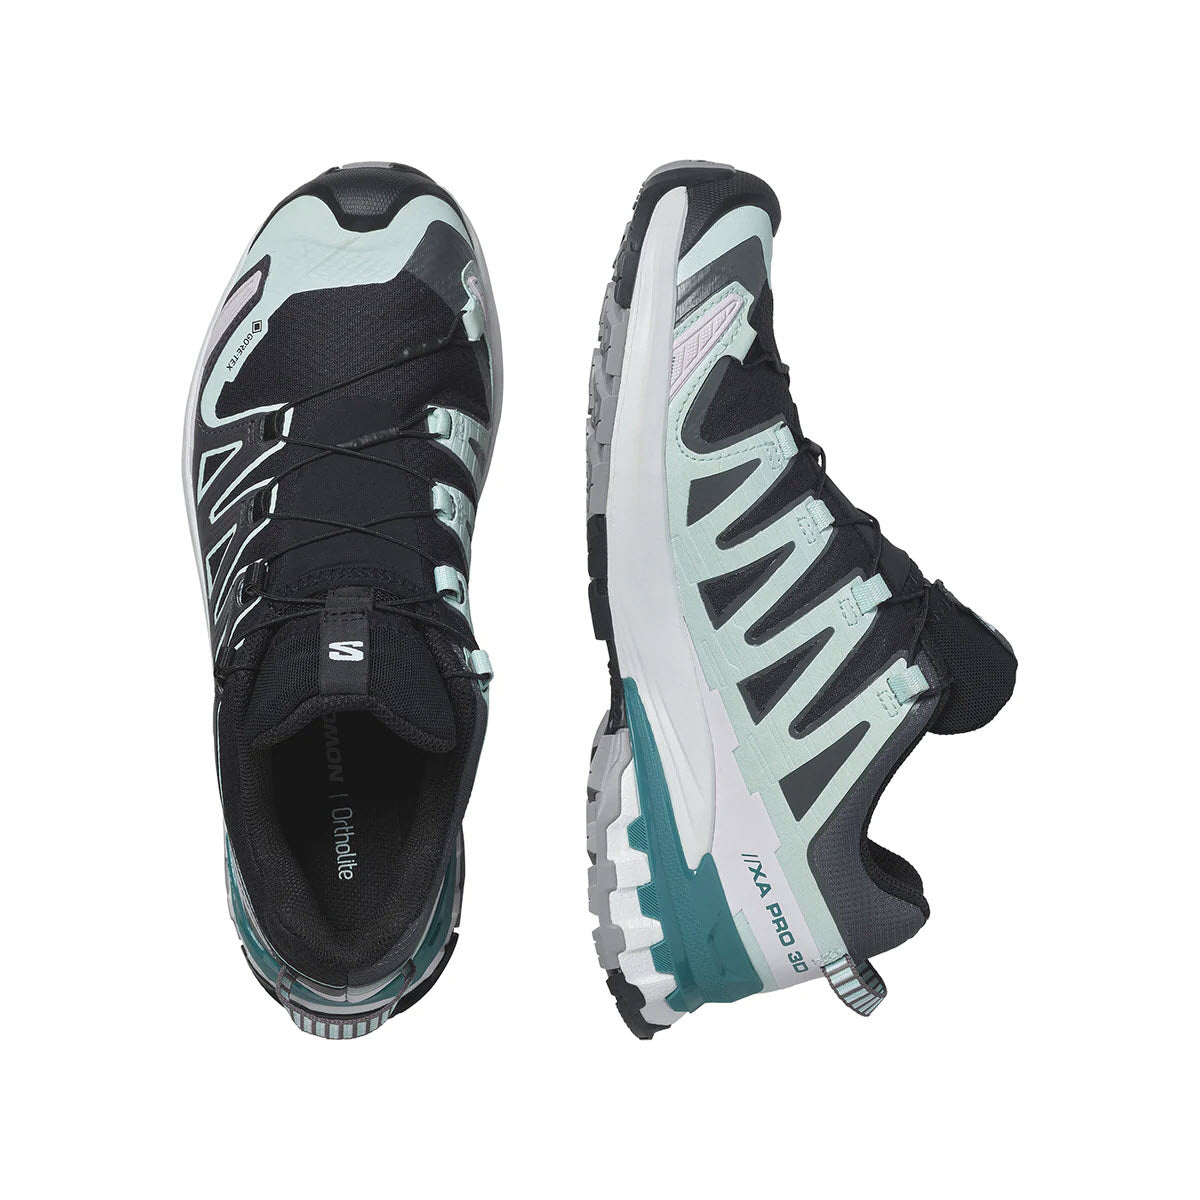 A pair of black and teal Salomon XA PRO 3D V9 GTX trail running shoes with a waterproof GORE-TEX membrane, white soles, and laces, viewed from above.